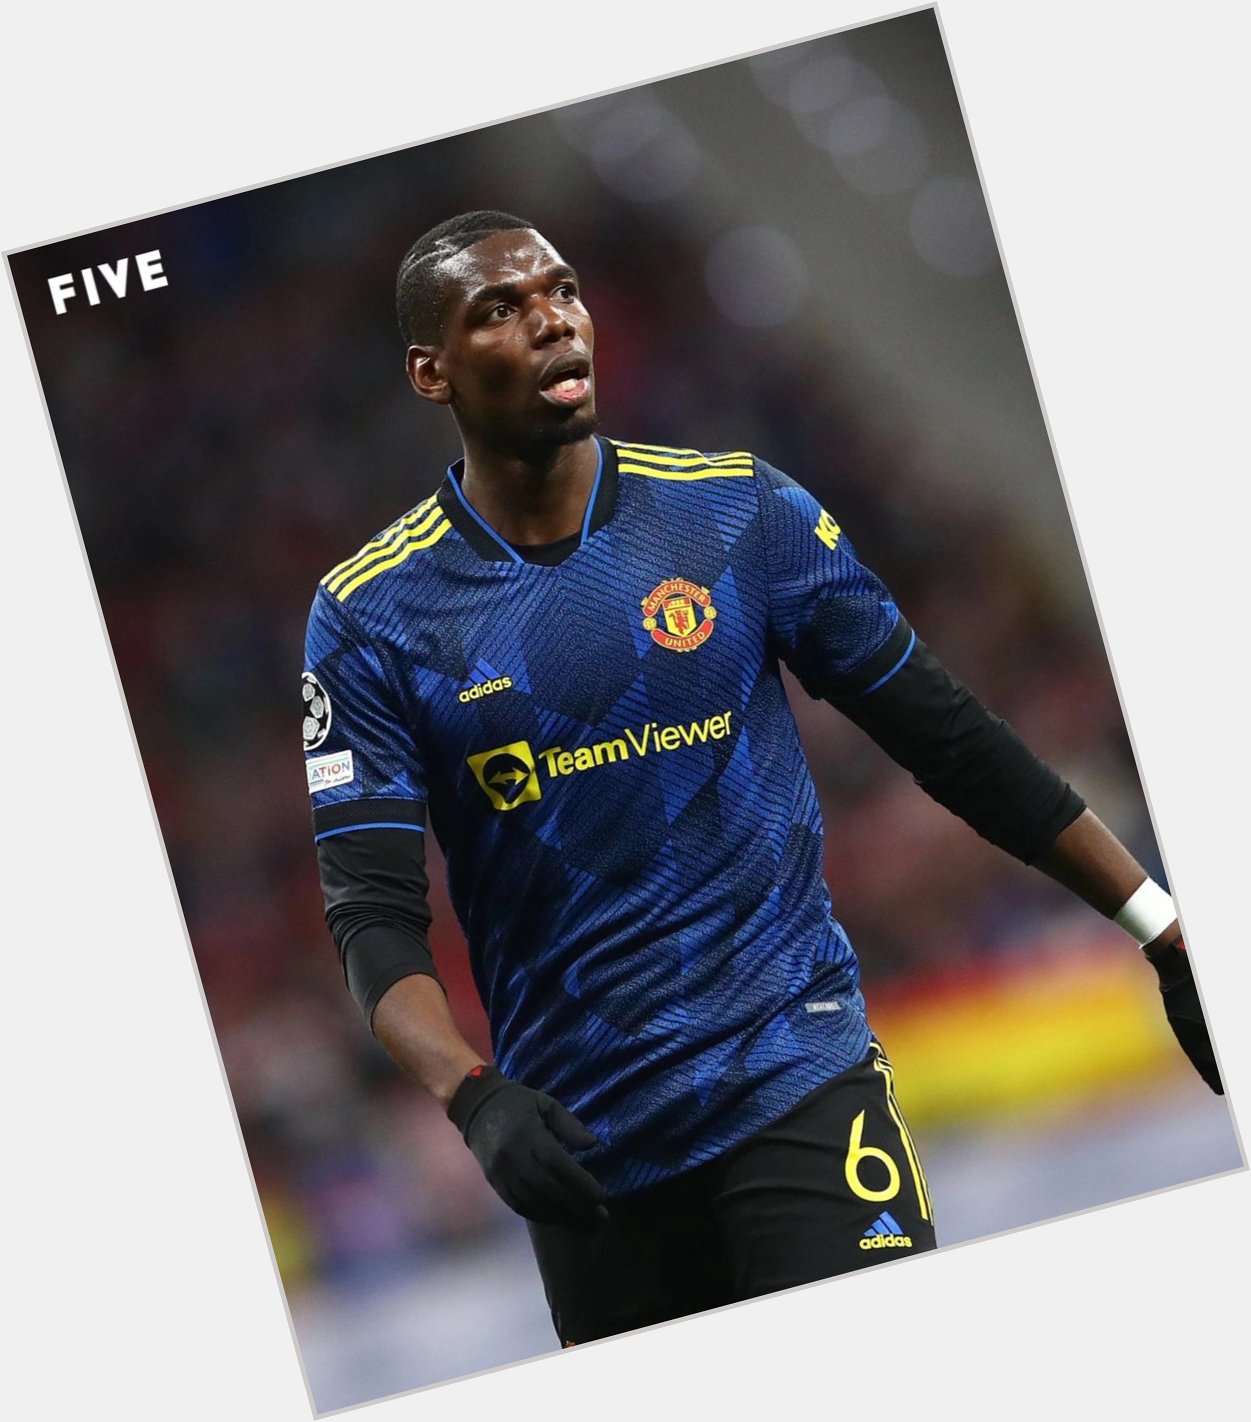   Happy Birthday to Manchester United midfielder, Paul Pogba!    Have a great day  